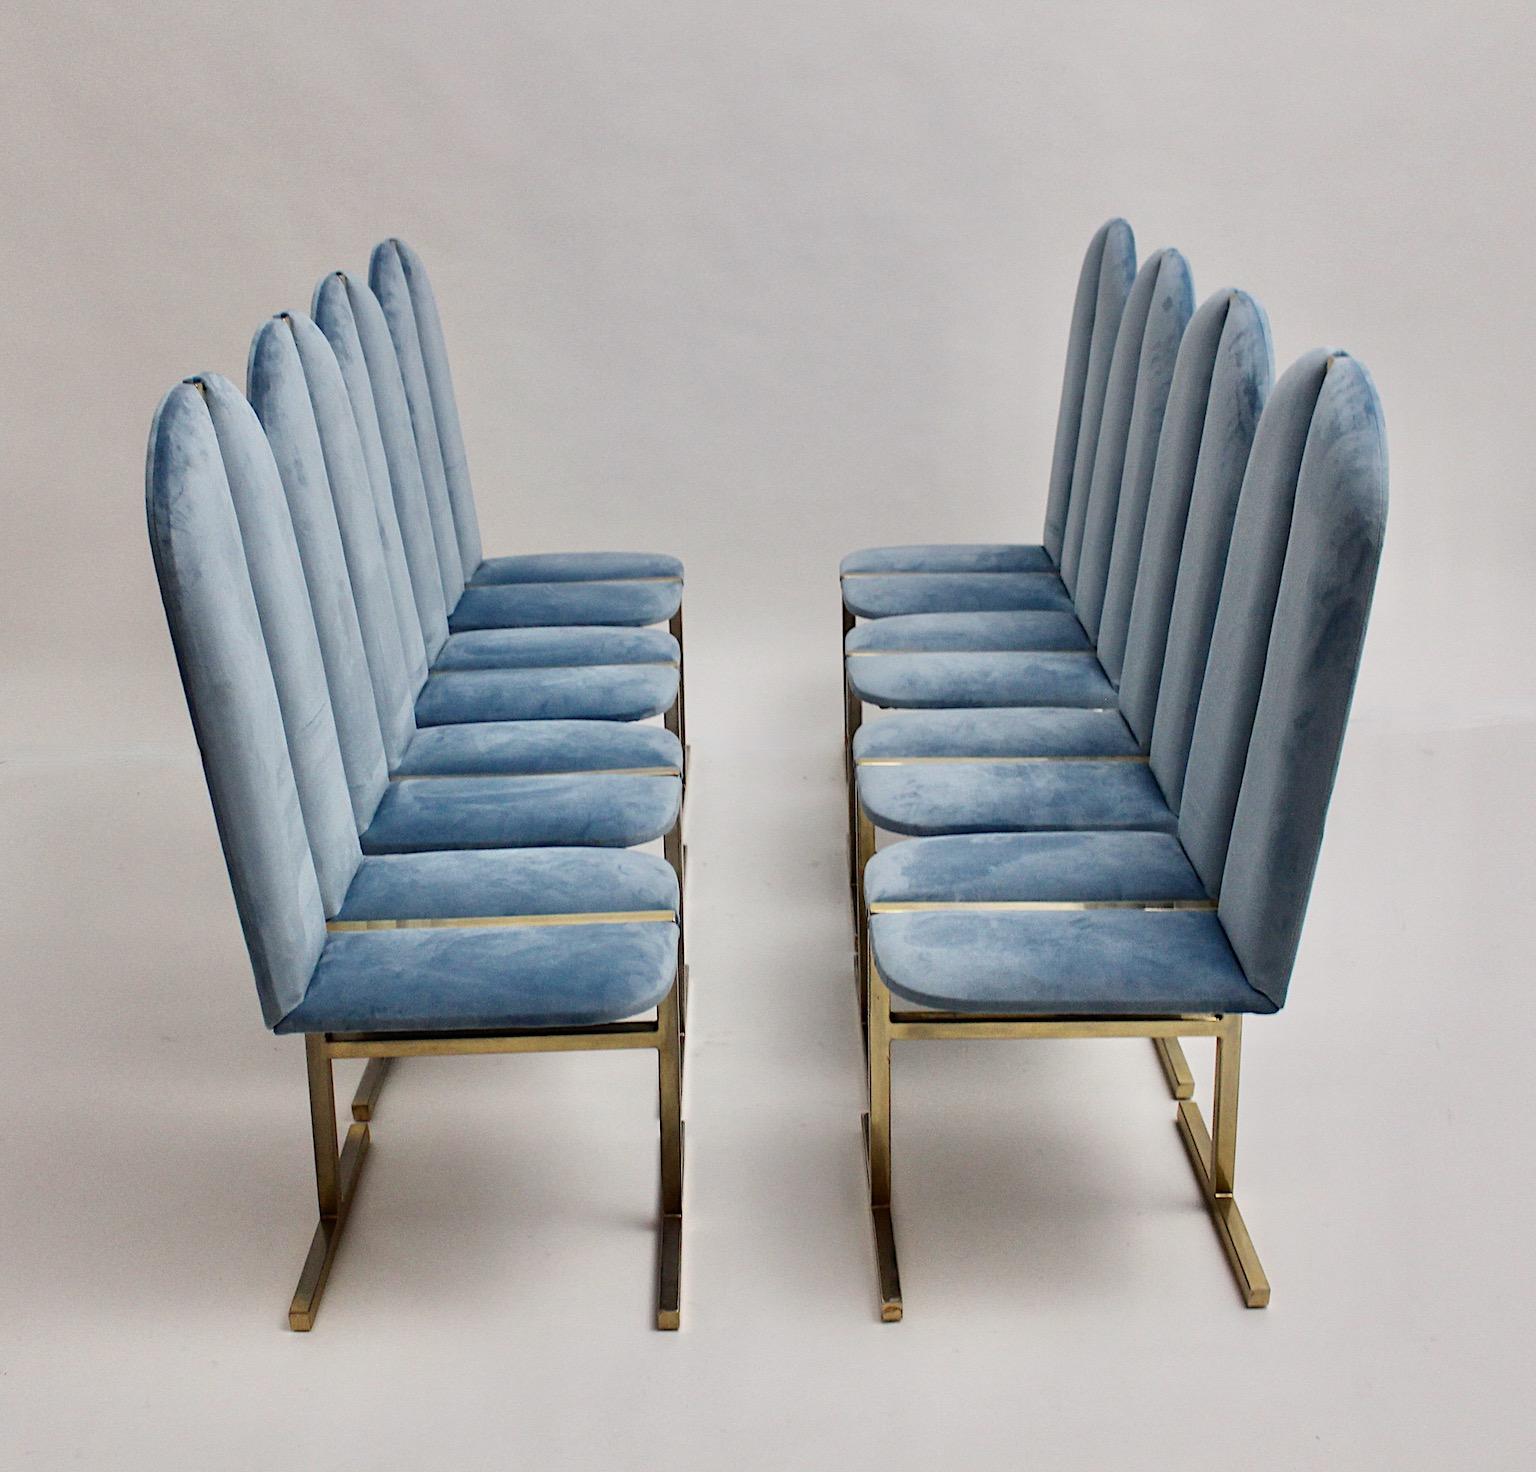 Hollywood Regency style set of eight dining chairs or chairs from nickel plated brass designed and manufactured 1970s Italy.
The dining chairs were made of square shaped metal tubes which form a comfortable and sophisticated construction. The